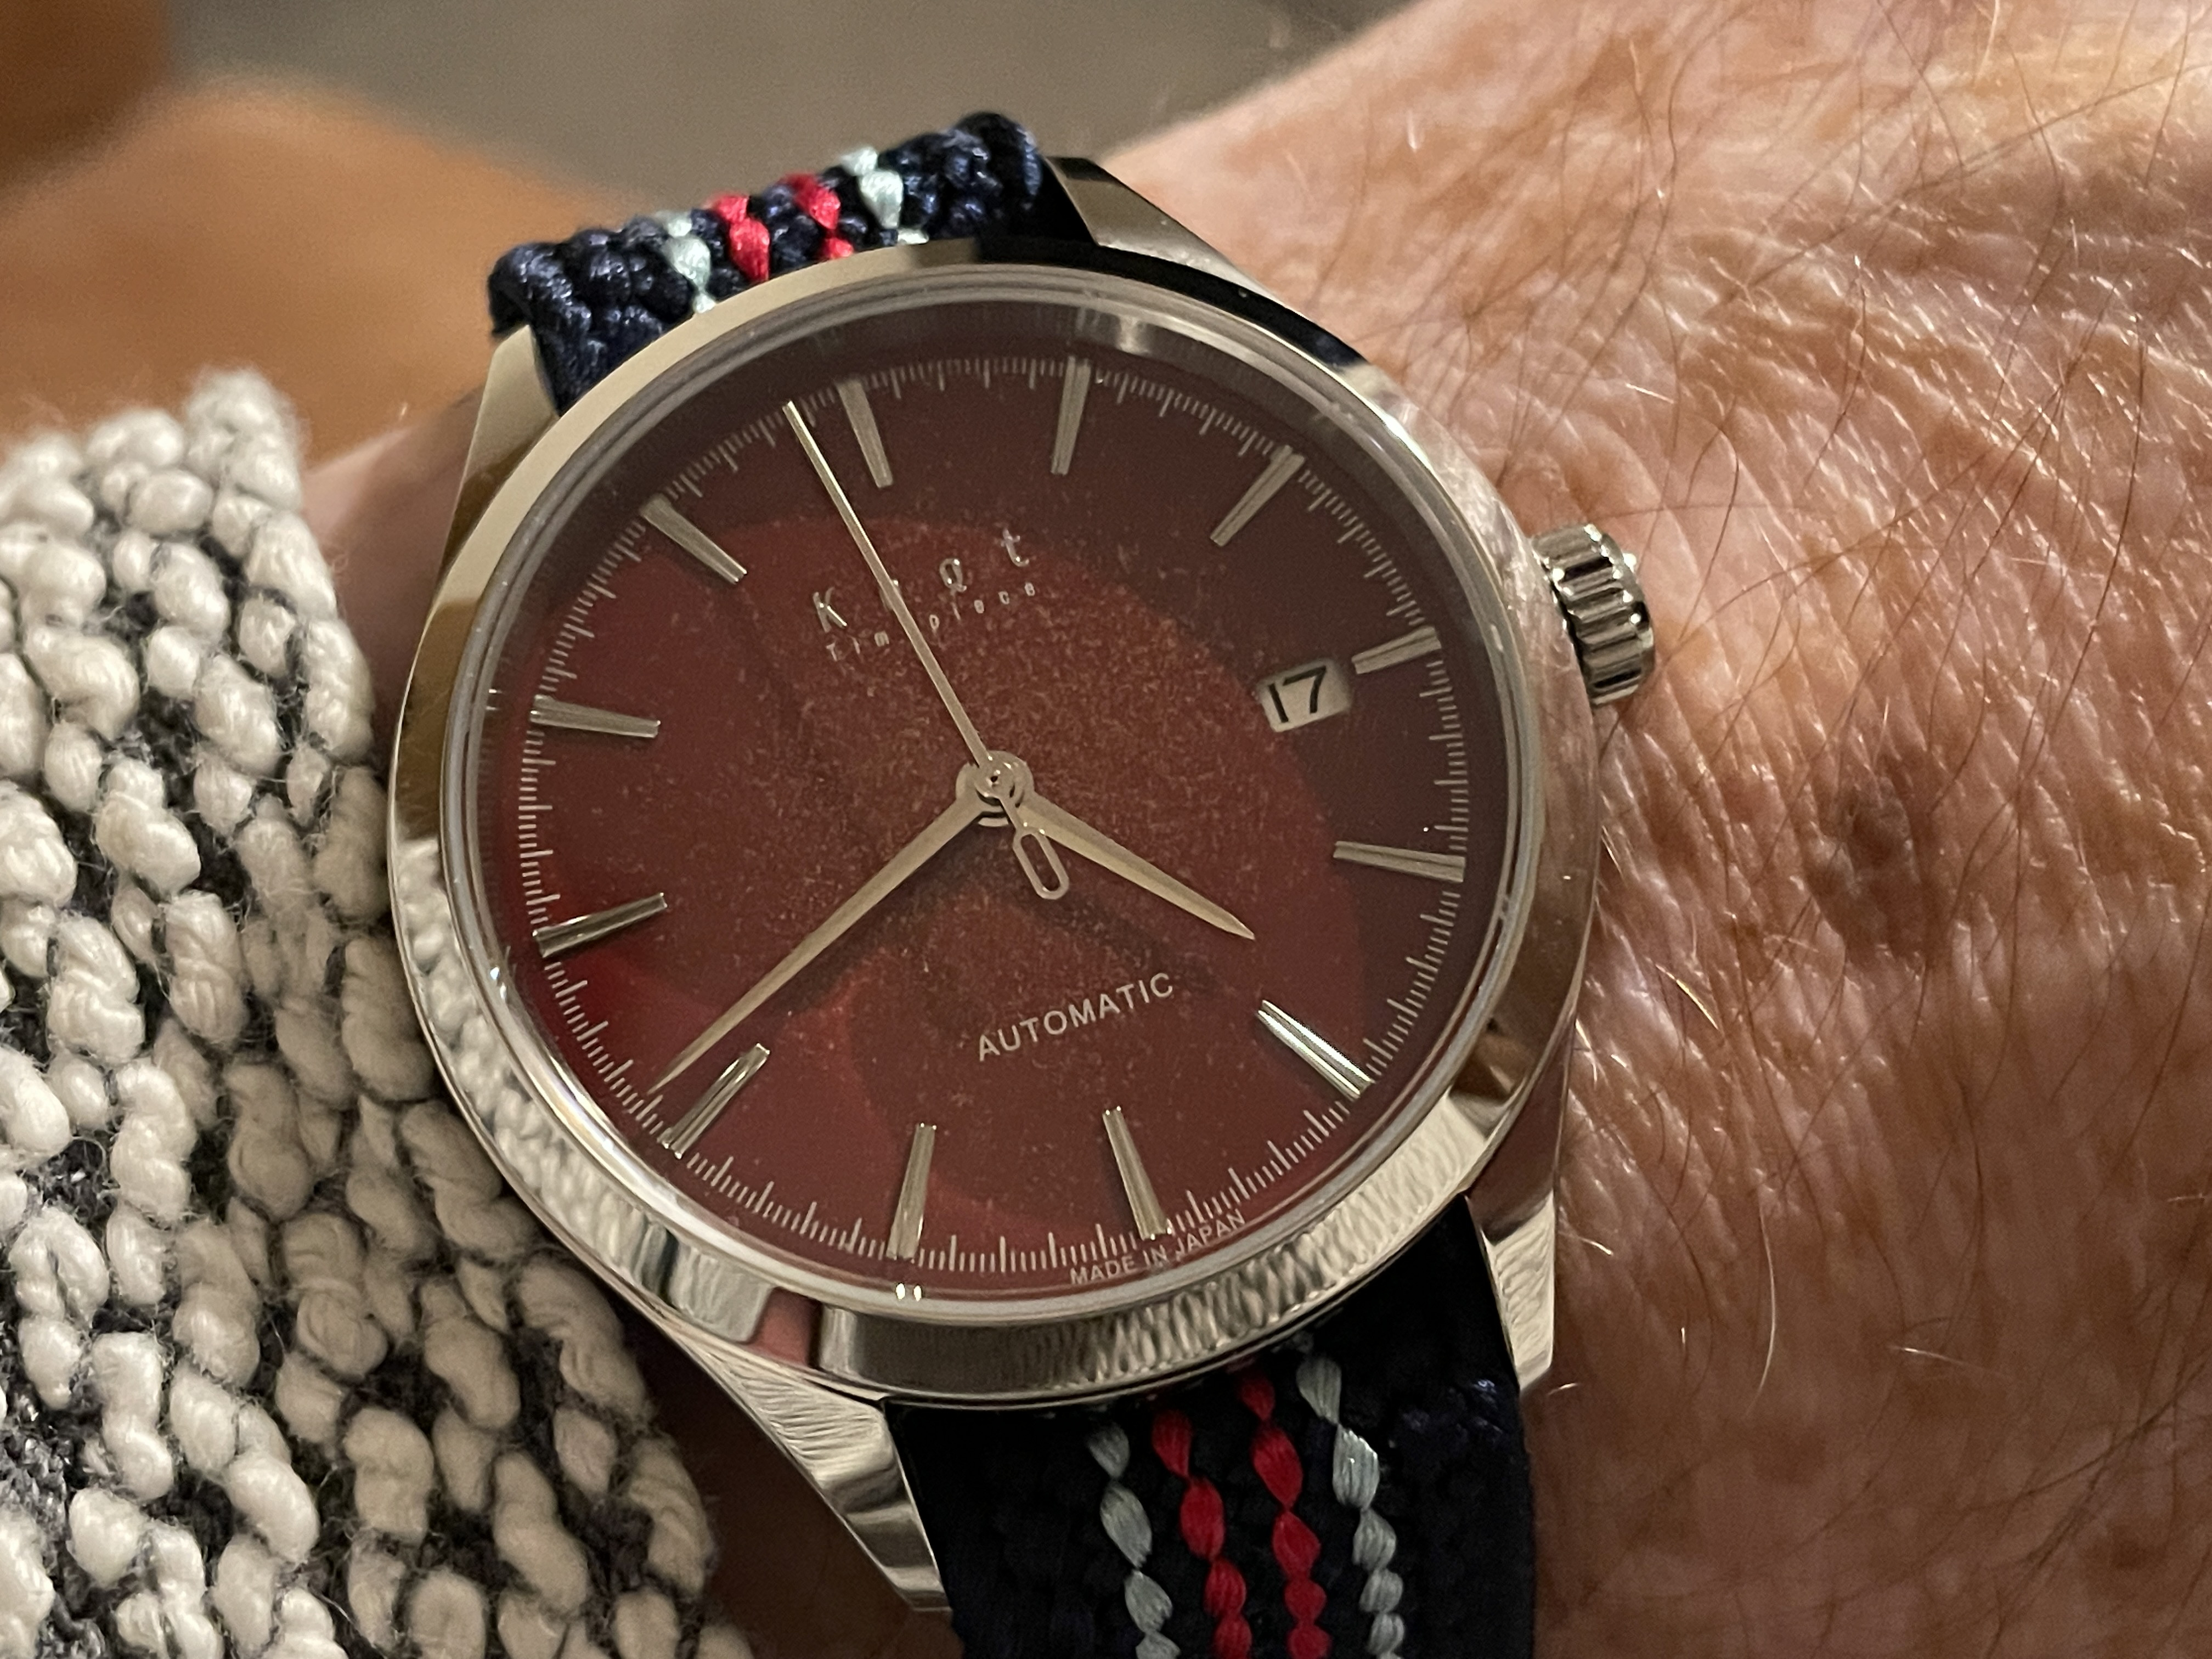 Zaratsu polished and hand lacquered dial for half the price of a Grand Seiko!  - Genuine Watches - RWG: Replica Watch Guide Forum